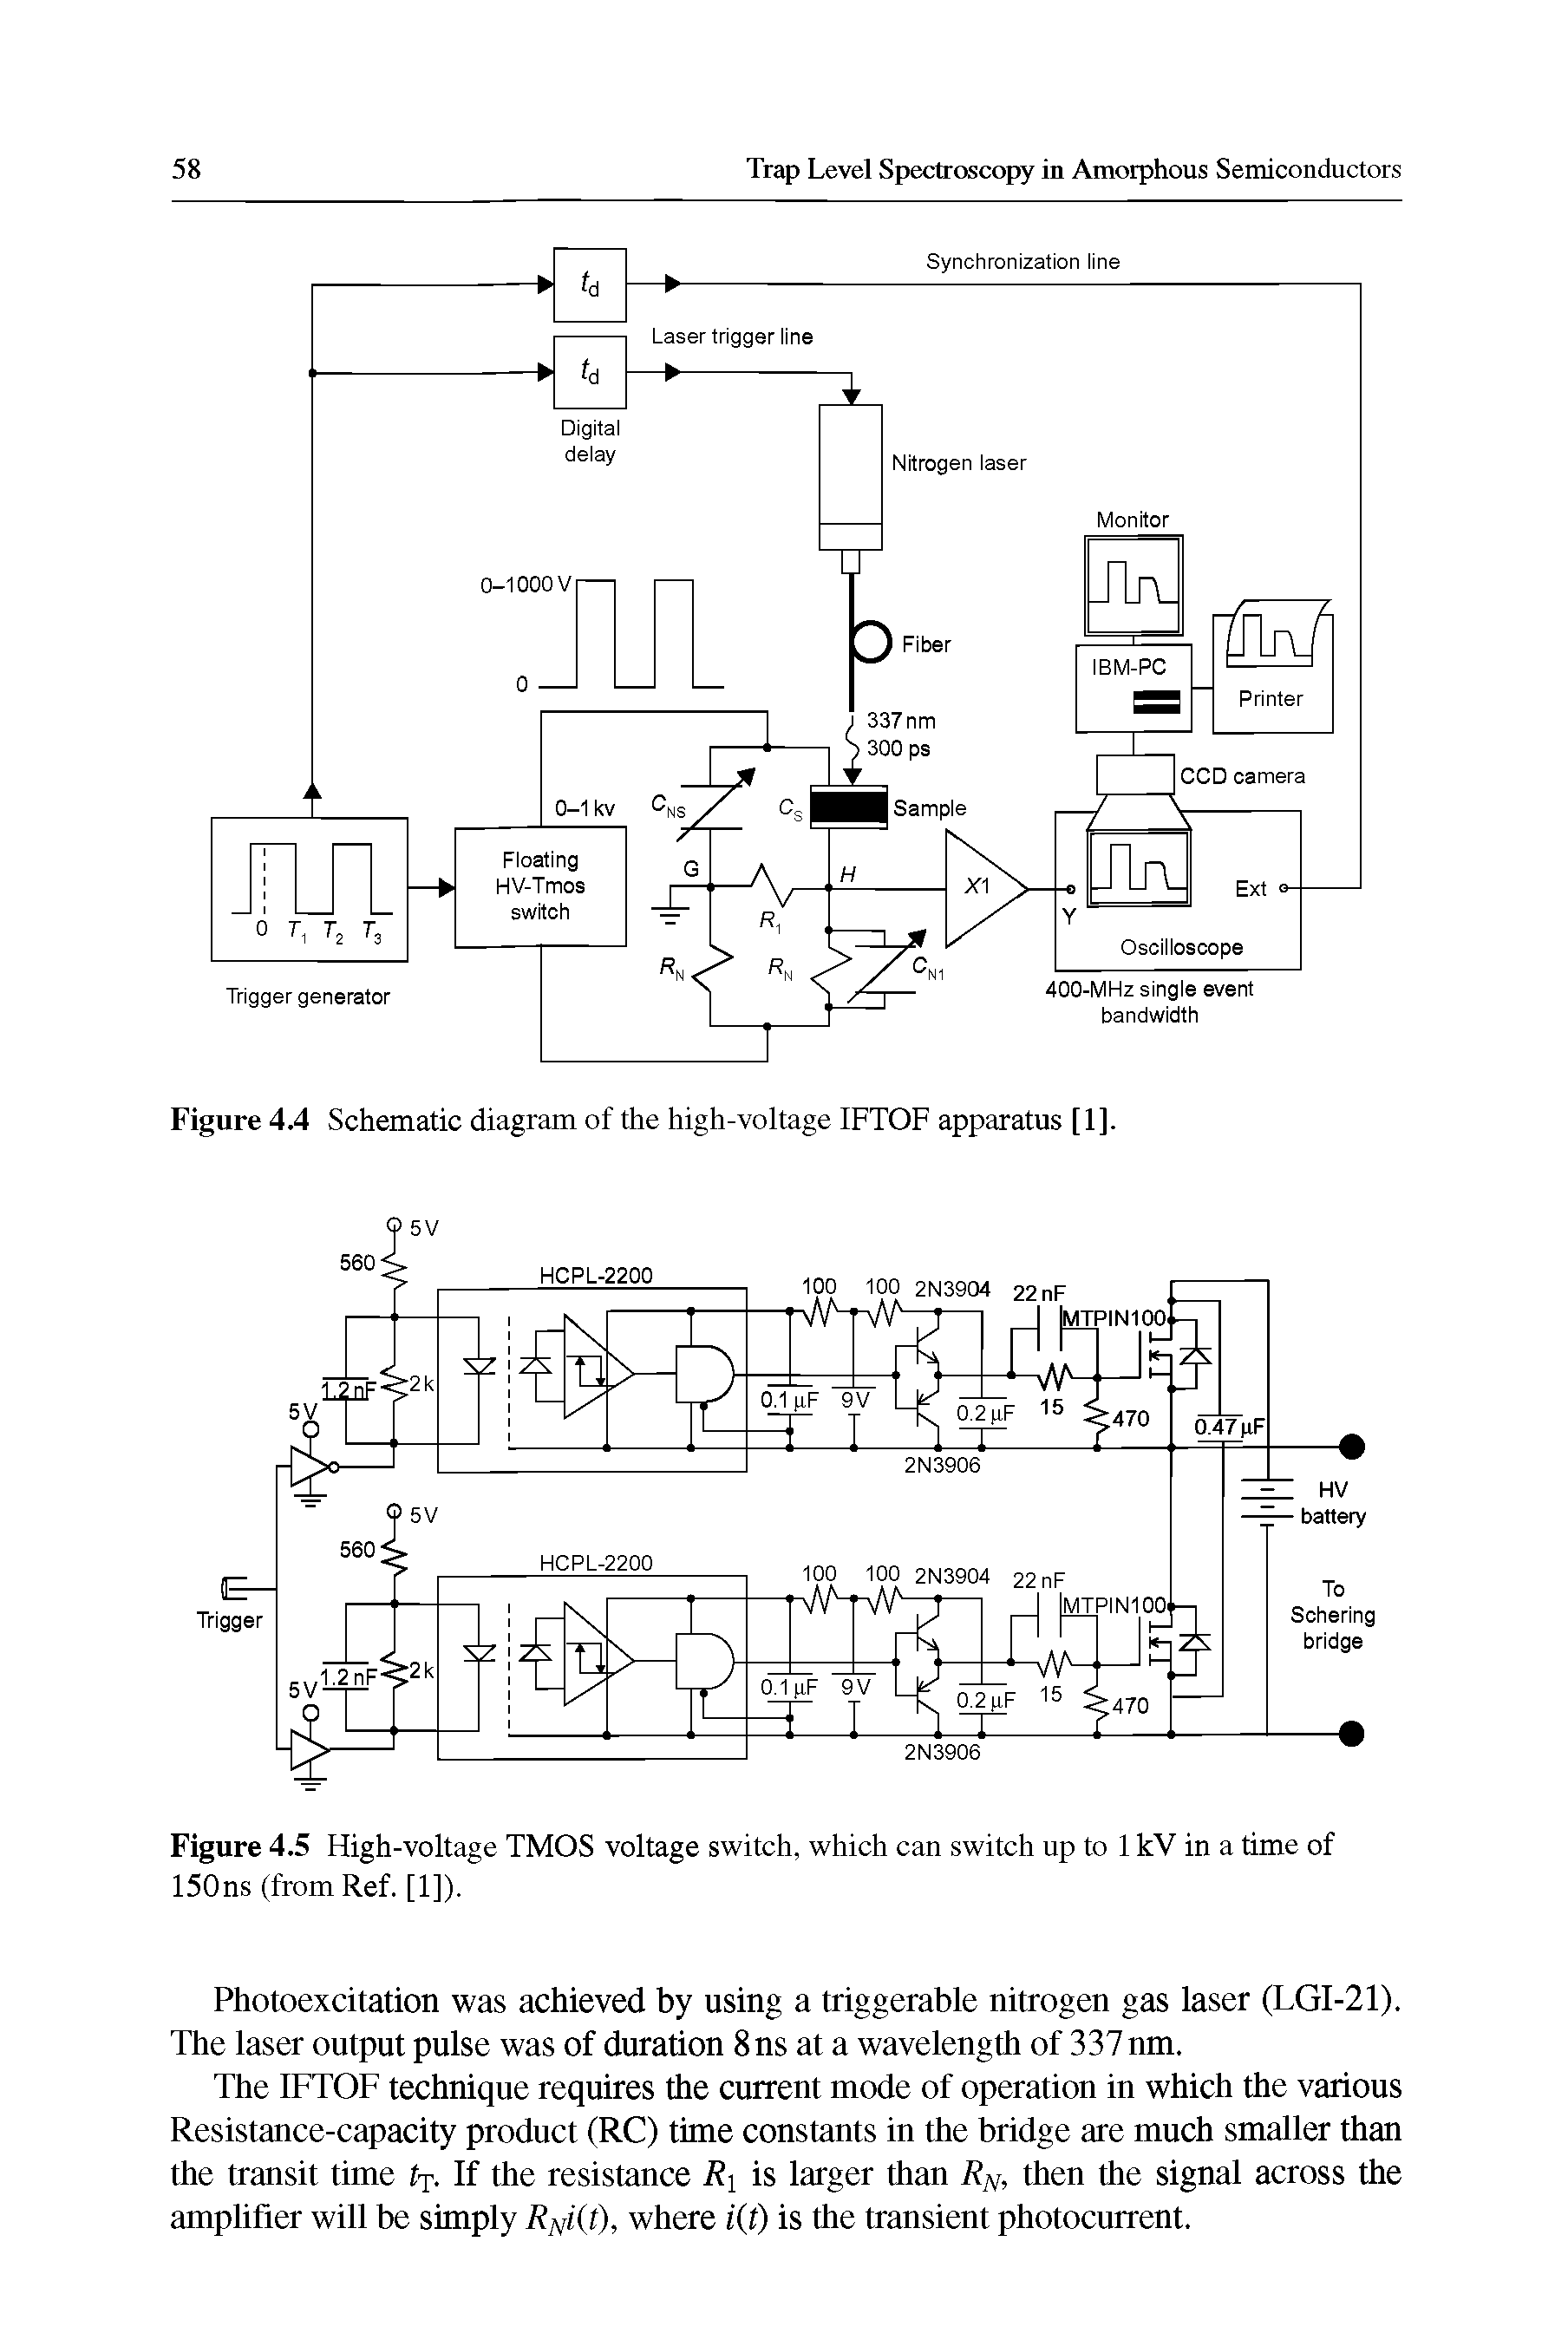 Figure 4.5 Fligh-voltage TMOS voltage switch, which can switch up to 1 kV in a time of 150ns (from Ref. [1]).